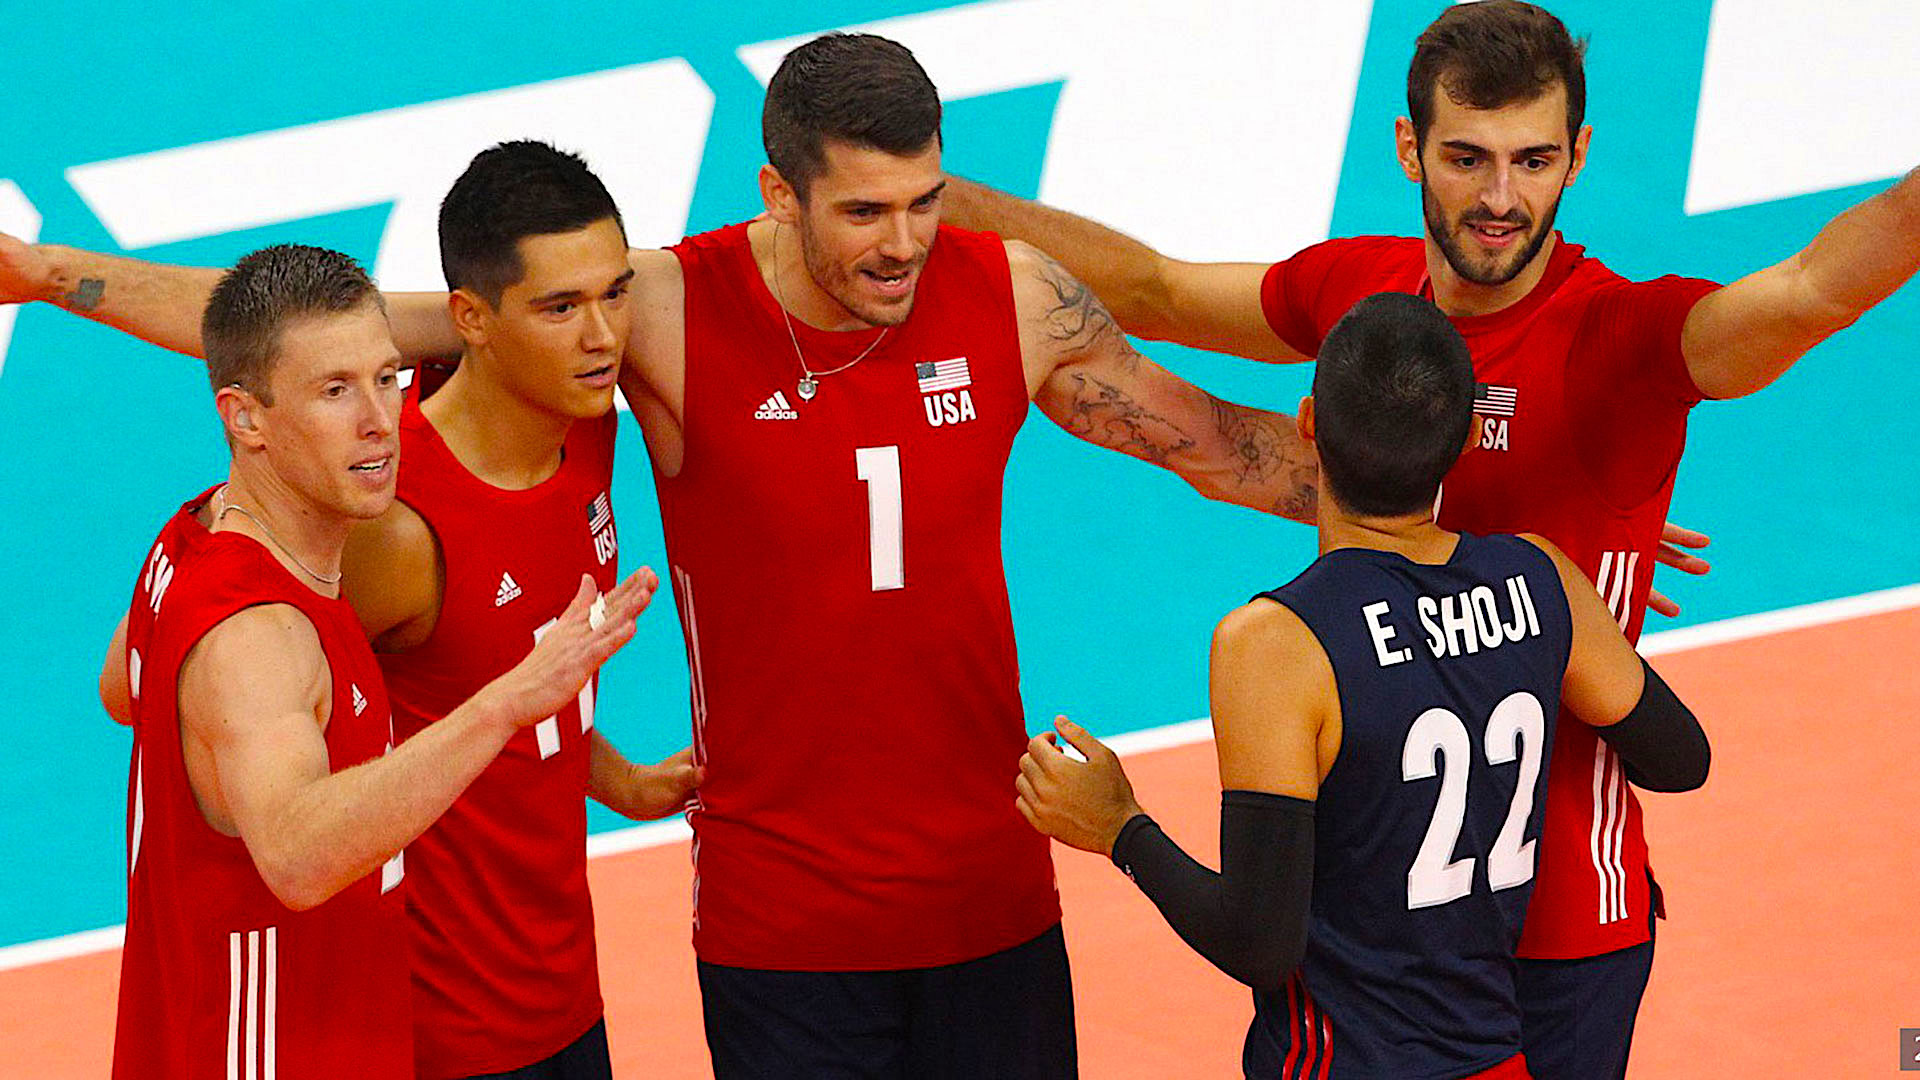 Volleyball Nations League 2023 An InDepth Look at the Teams and